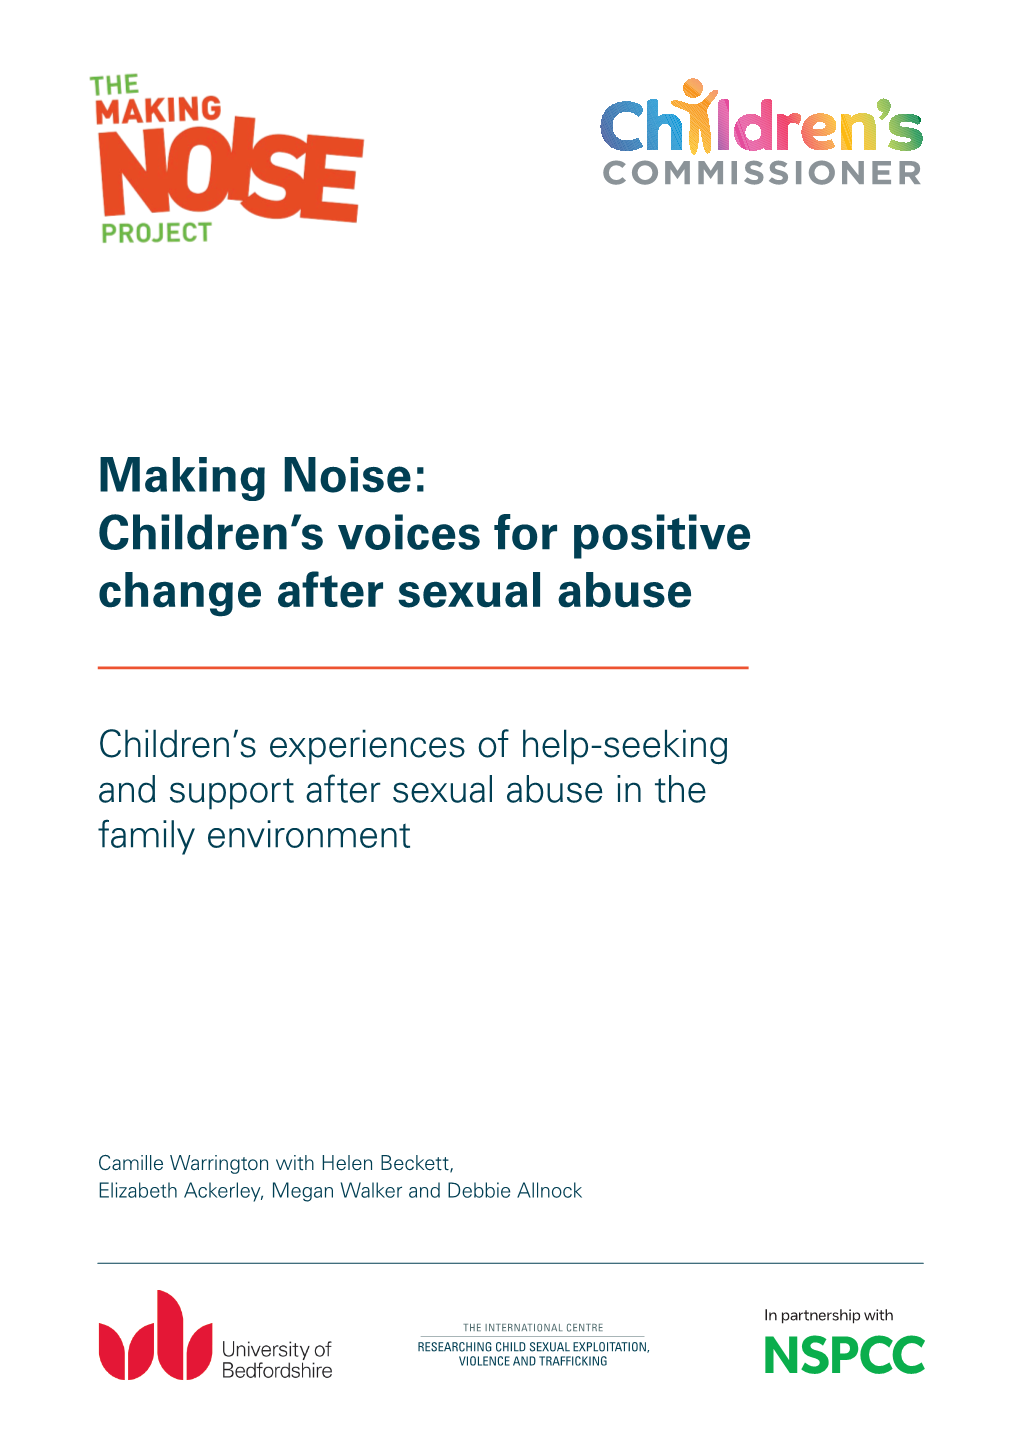 Making Noise: Children's Voices for Positive Change After Sexual Abuse